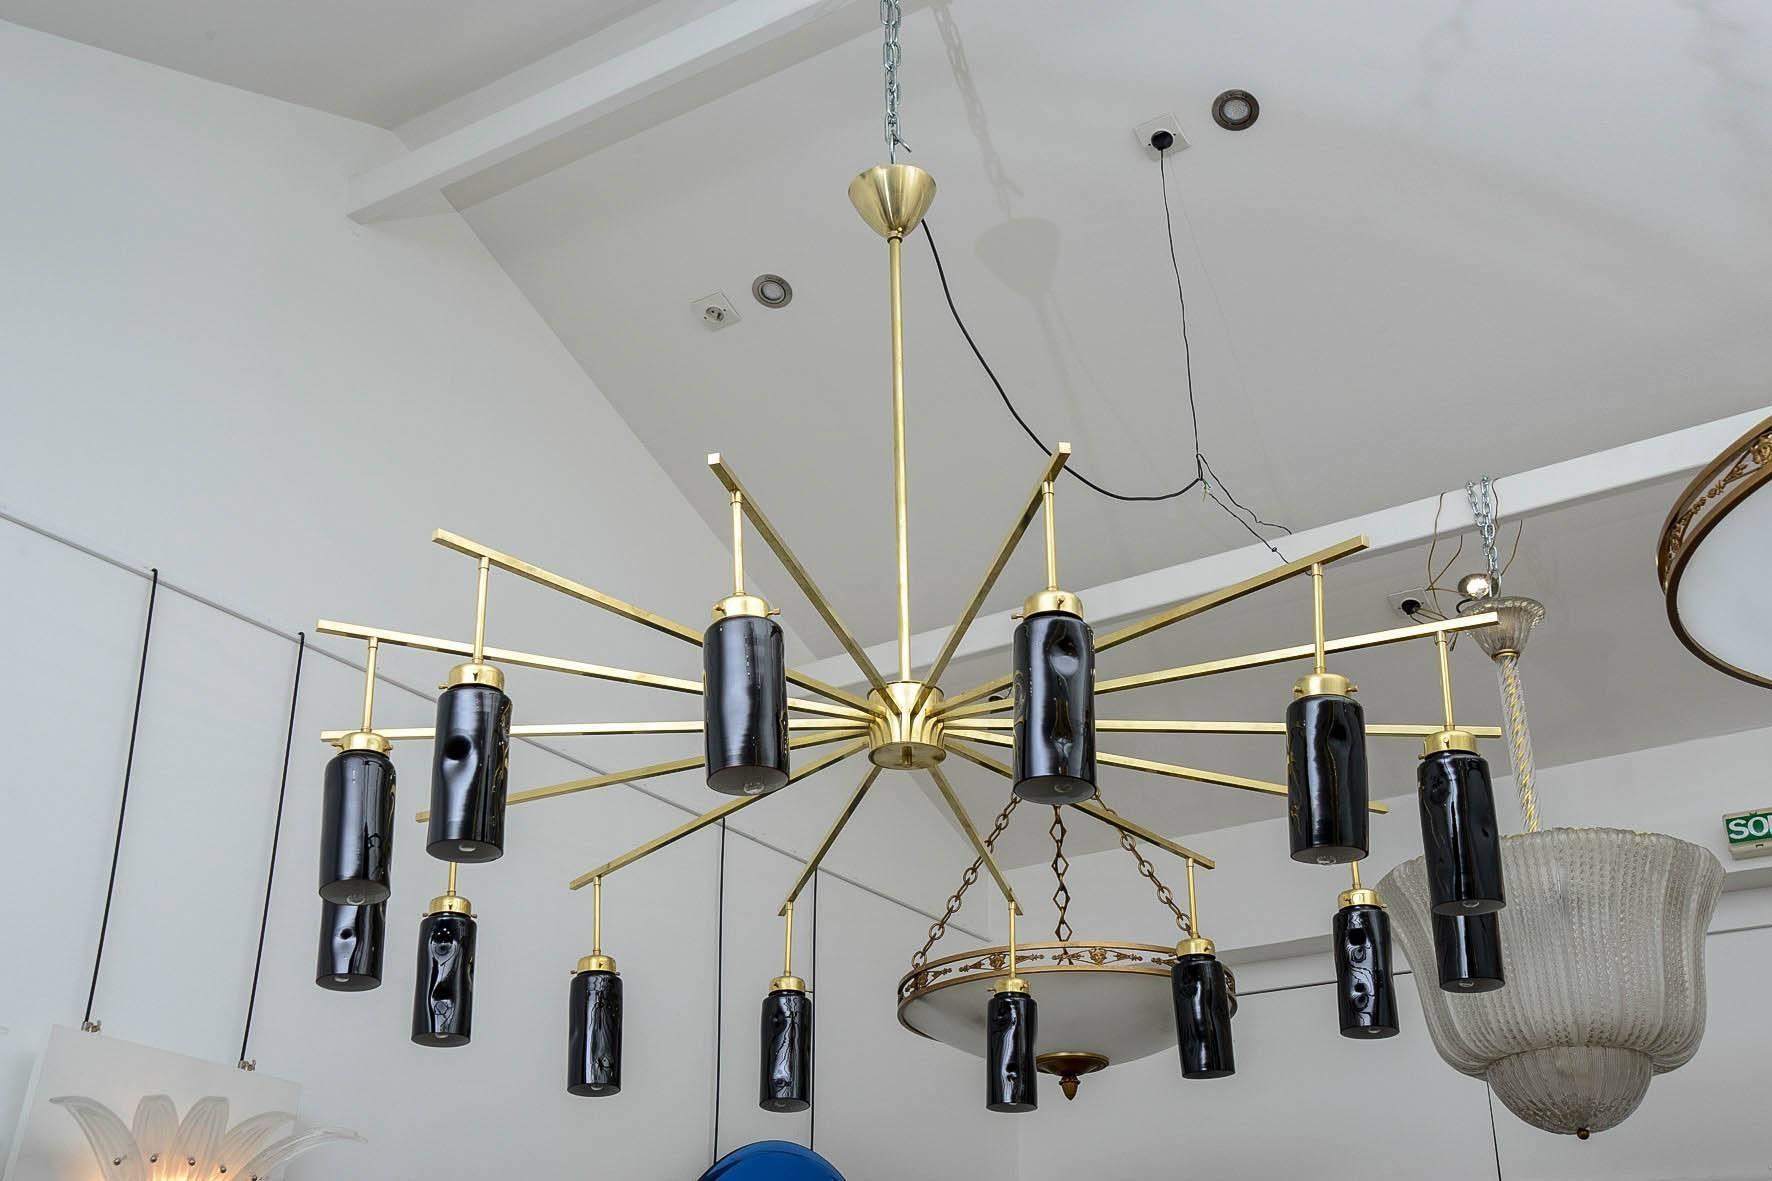 Spectacular 14 lamps spider pendant, in the taste of Stilnovo, in excellent condition.